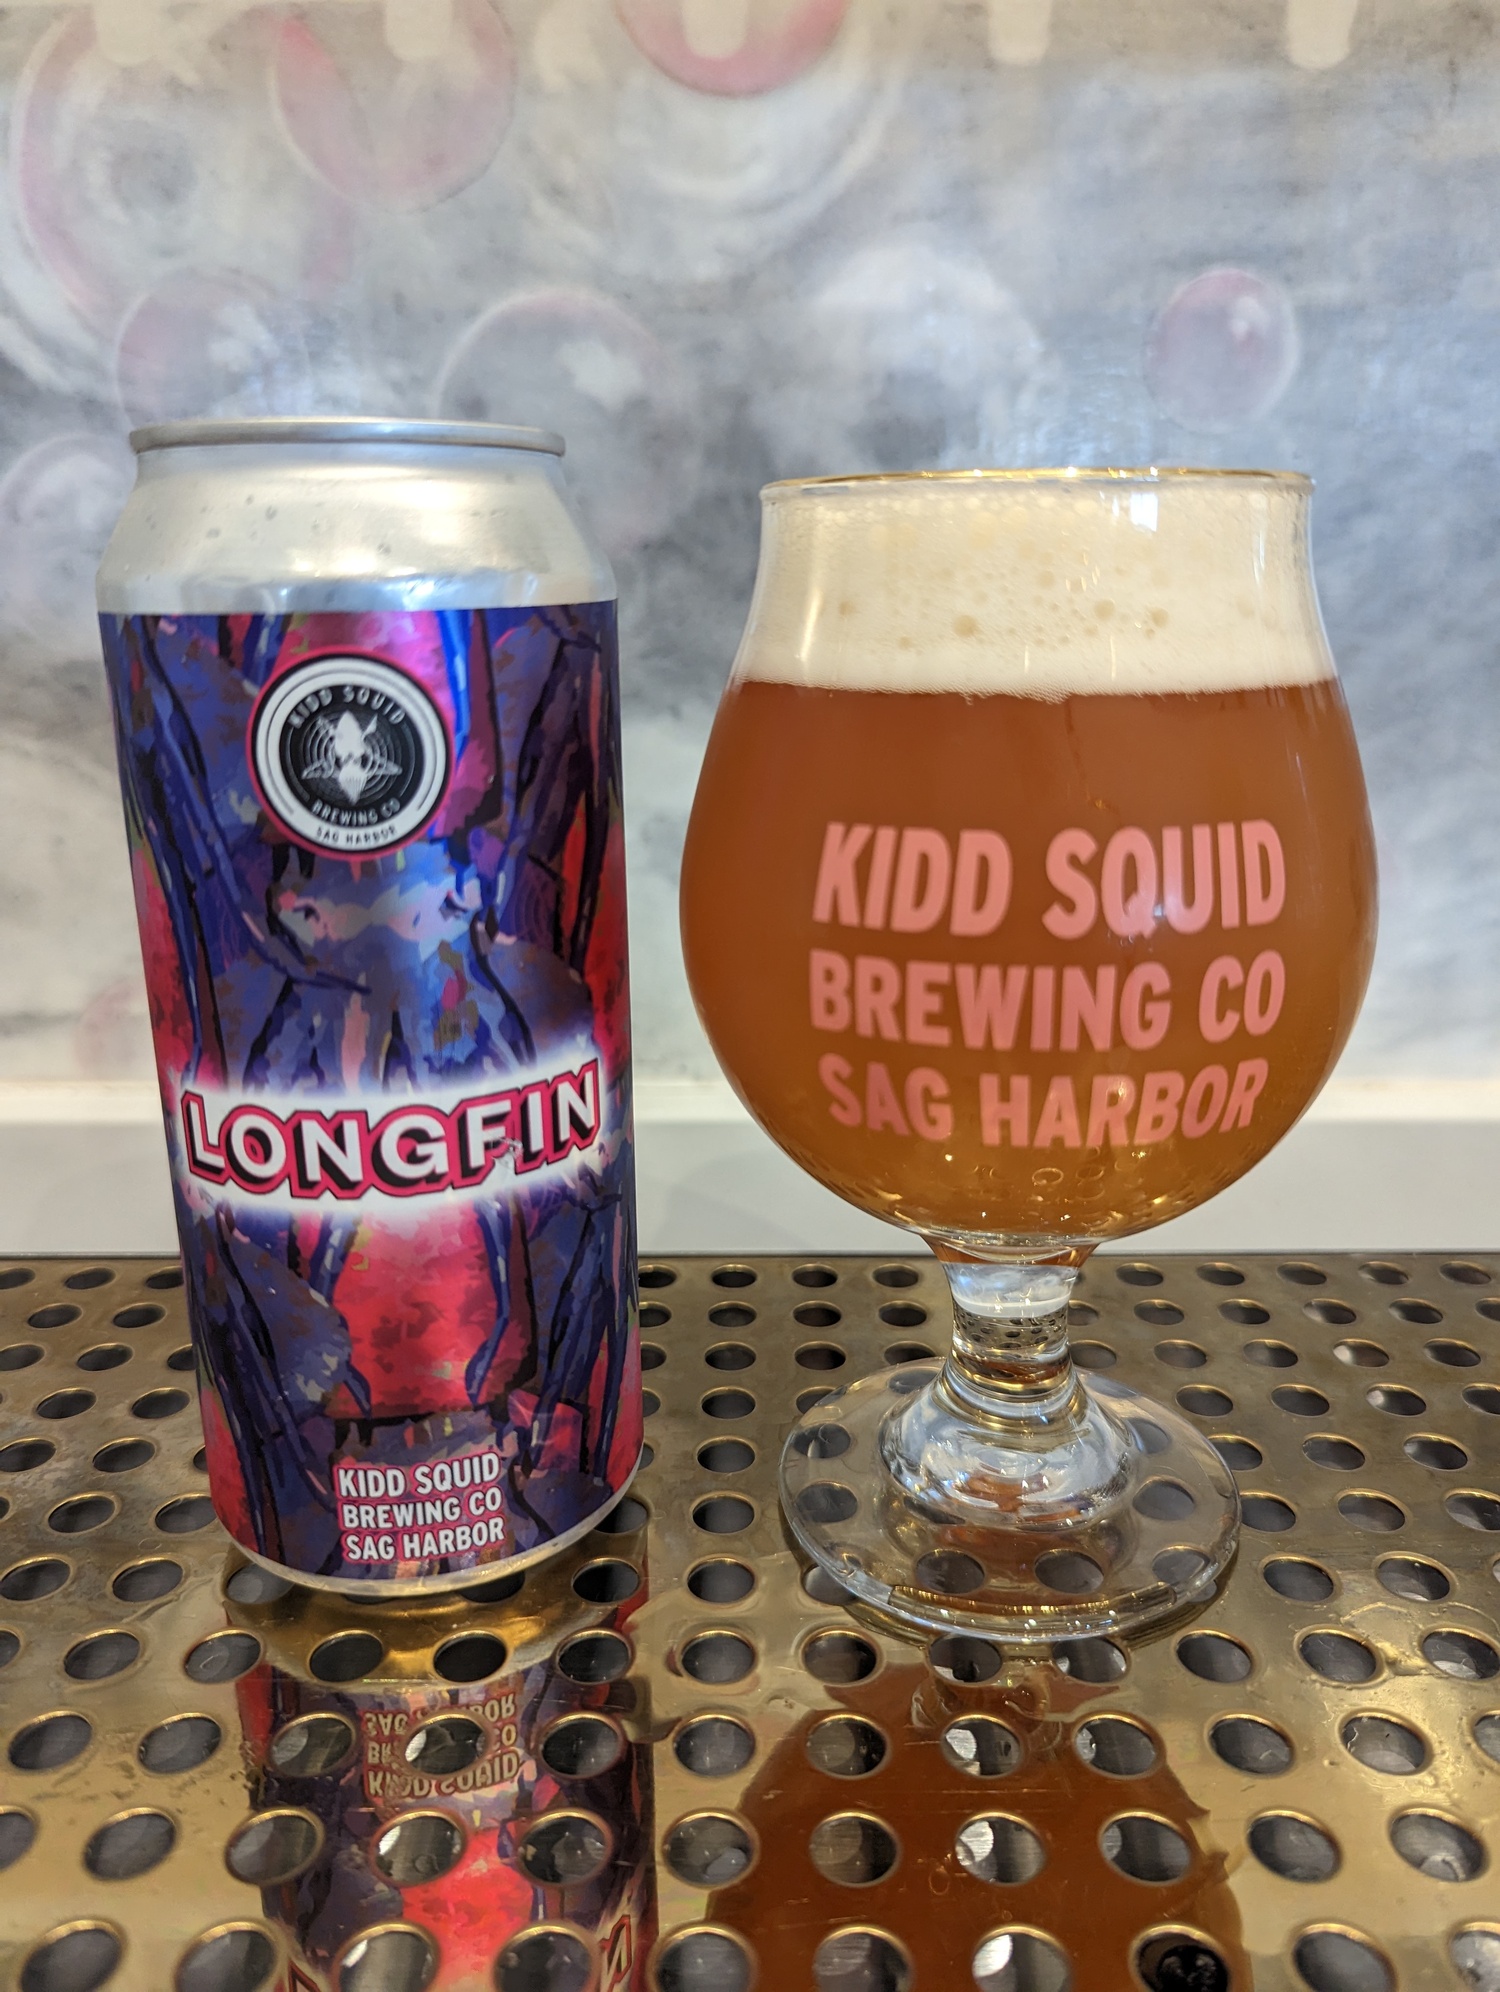 Kidd Squid brewing will be the site of the next 